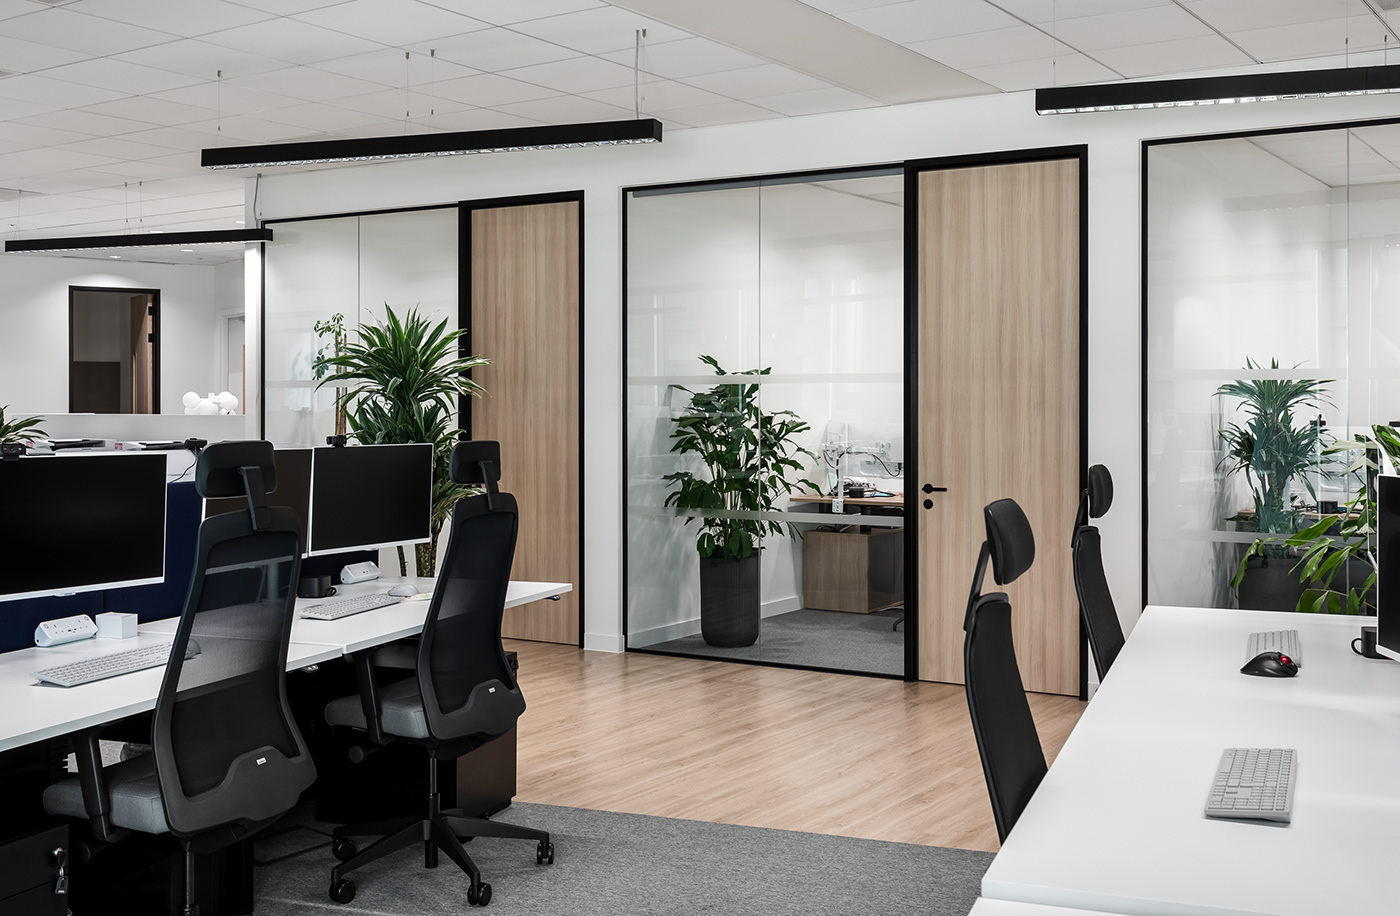 Office workplace workspace officedesign interiordesign CommercialDesign